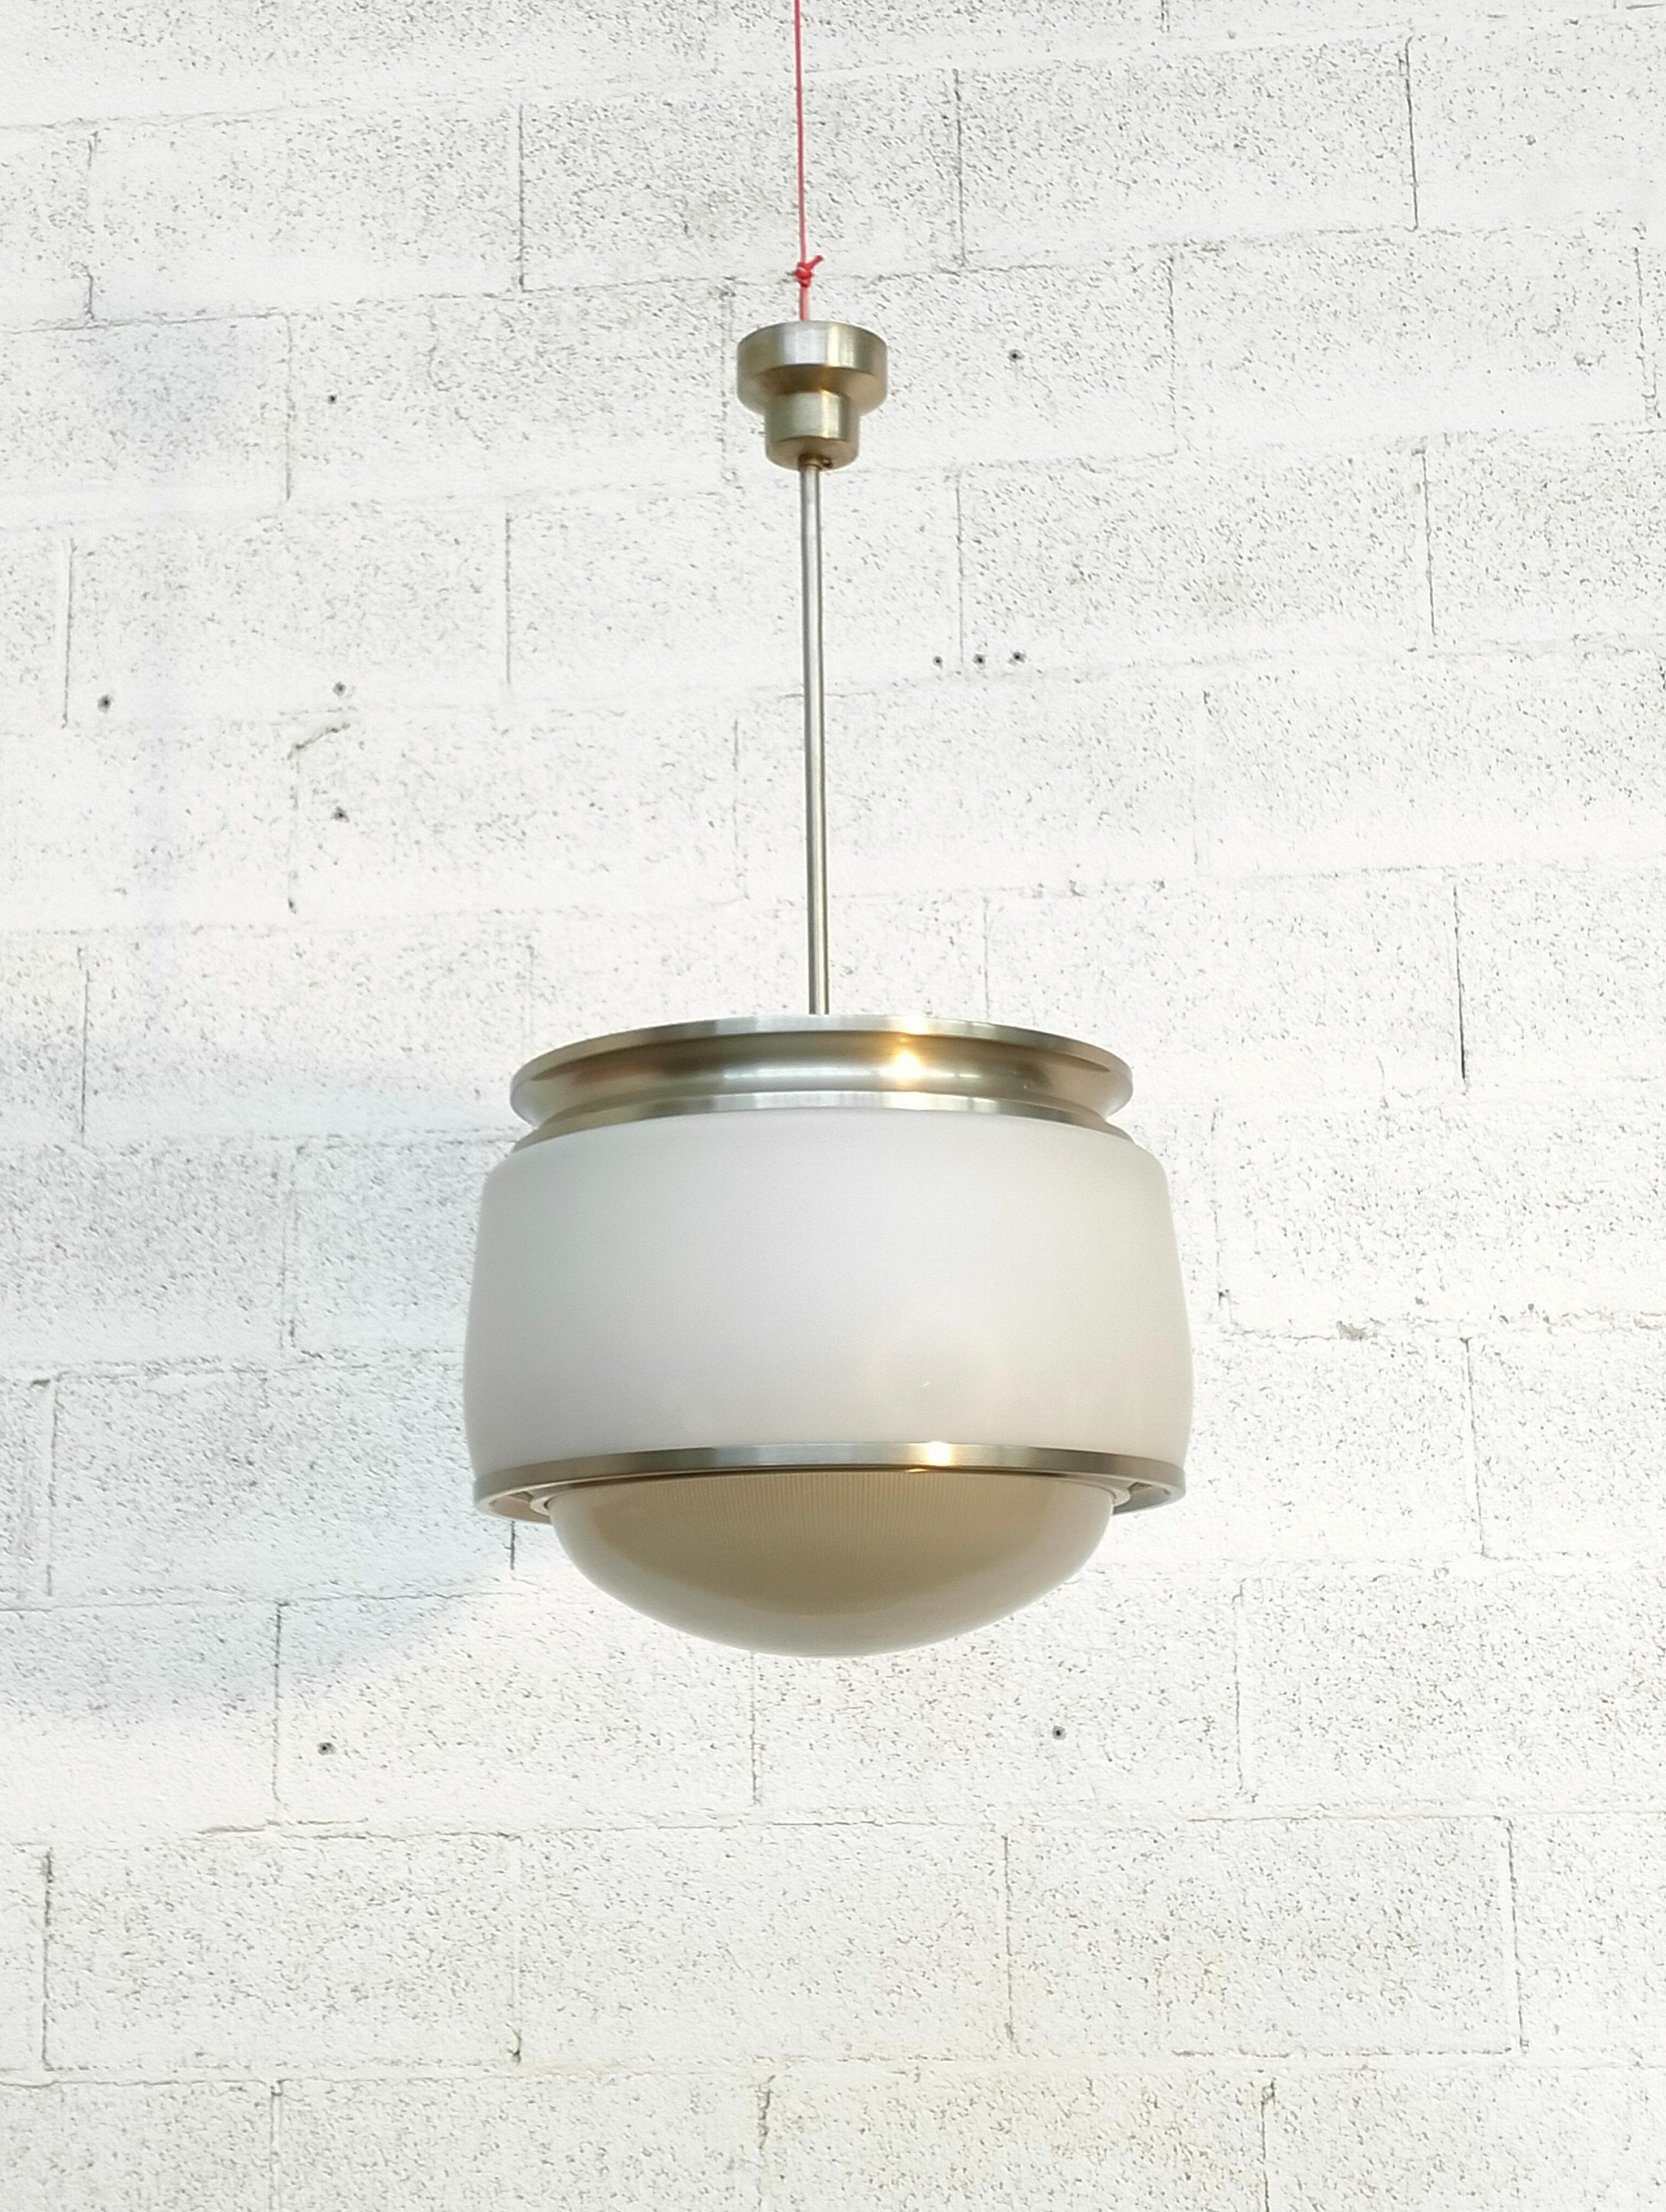 Mid-20th Century Glass Pendant Lamp “Kappa” Model by Sergio Mazza for Artemide 60s For Sale